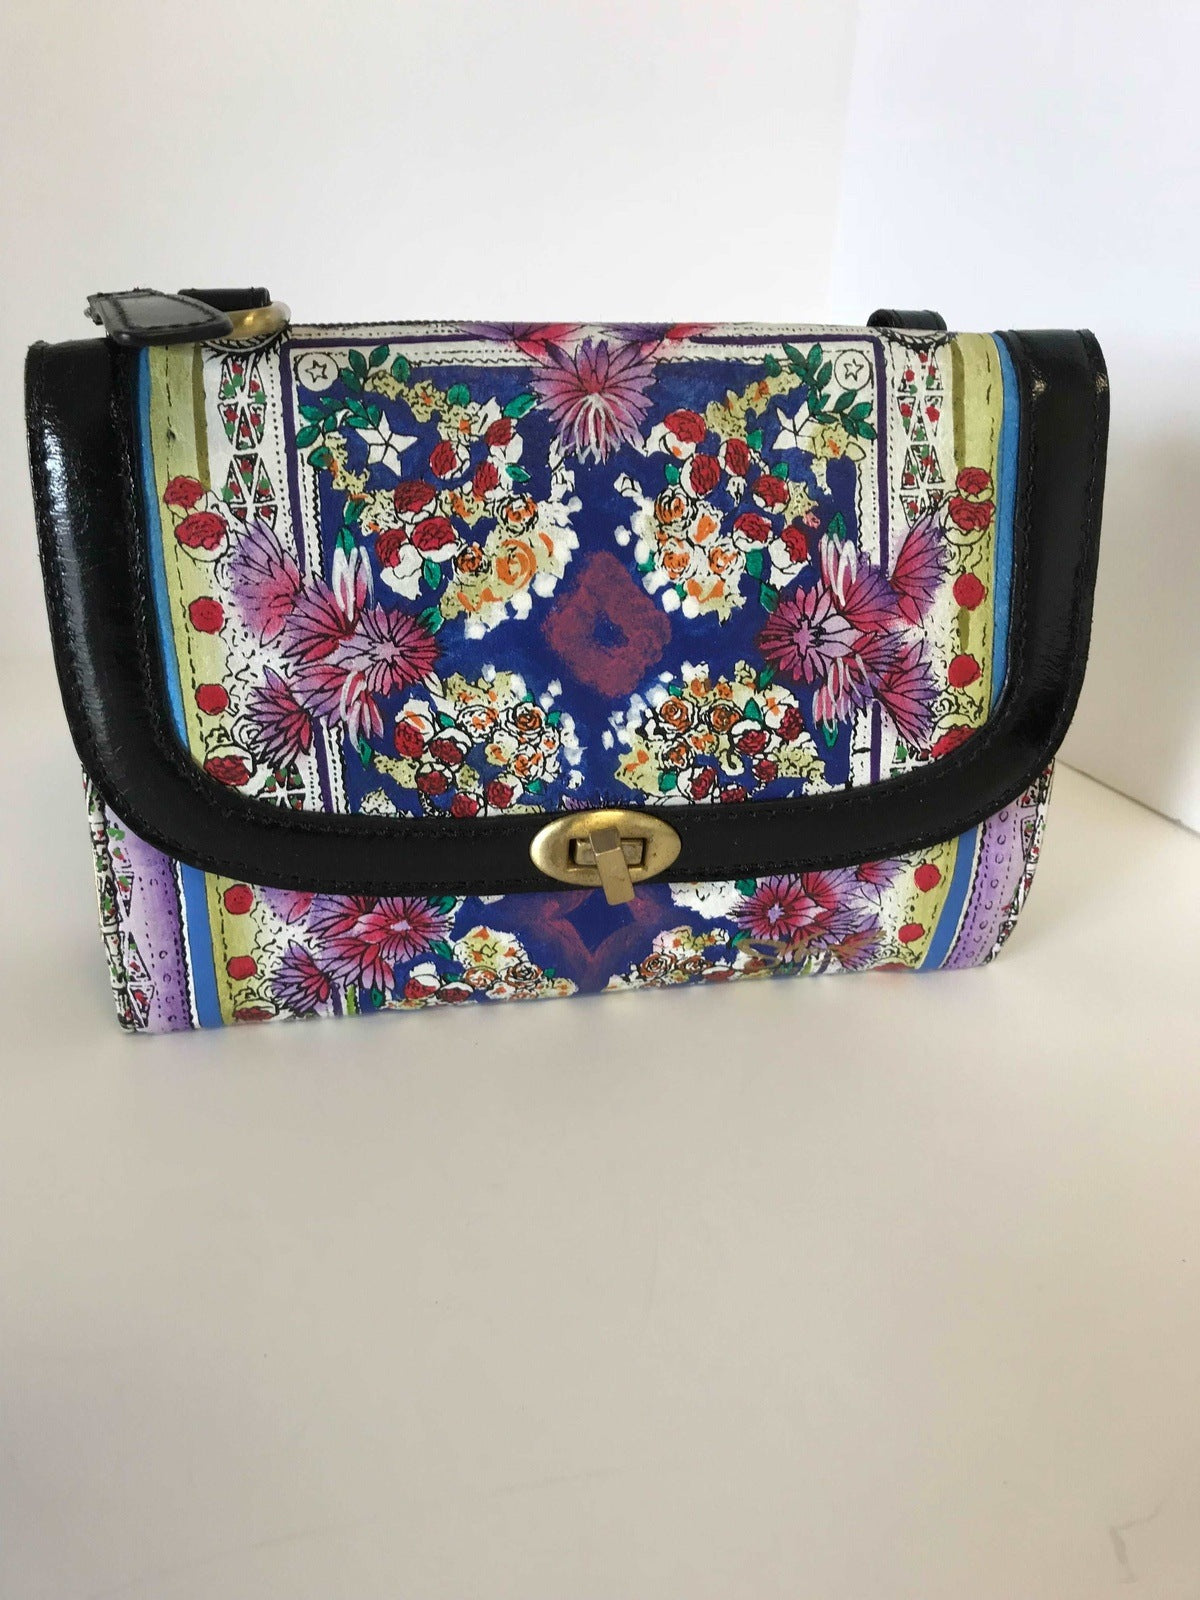 Sharif Designs Hand-Painted Floral Leather Handbag: A Fusion of Artistry and Functionality